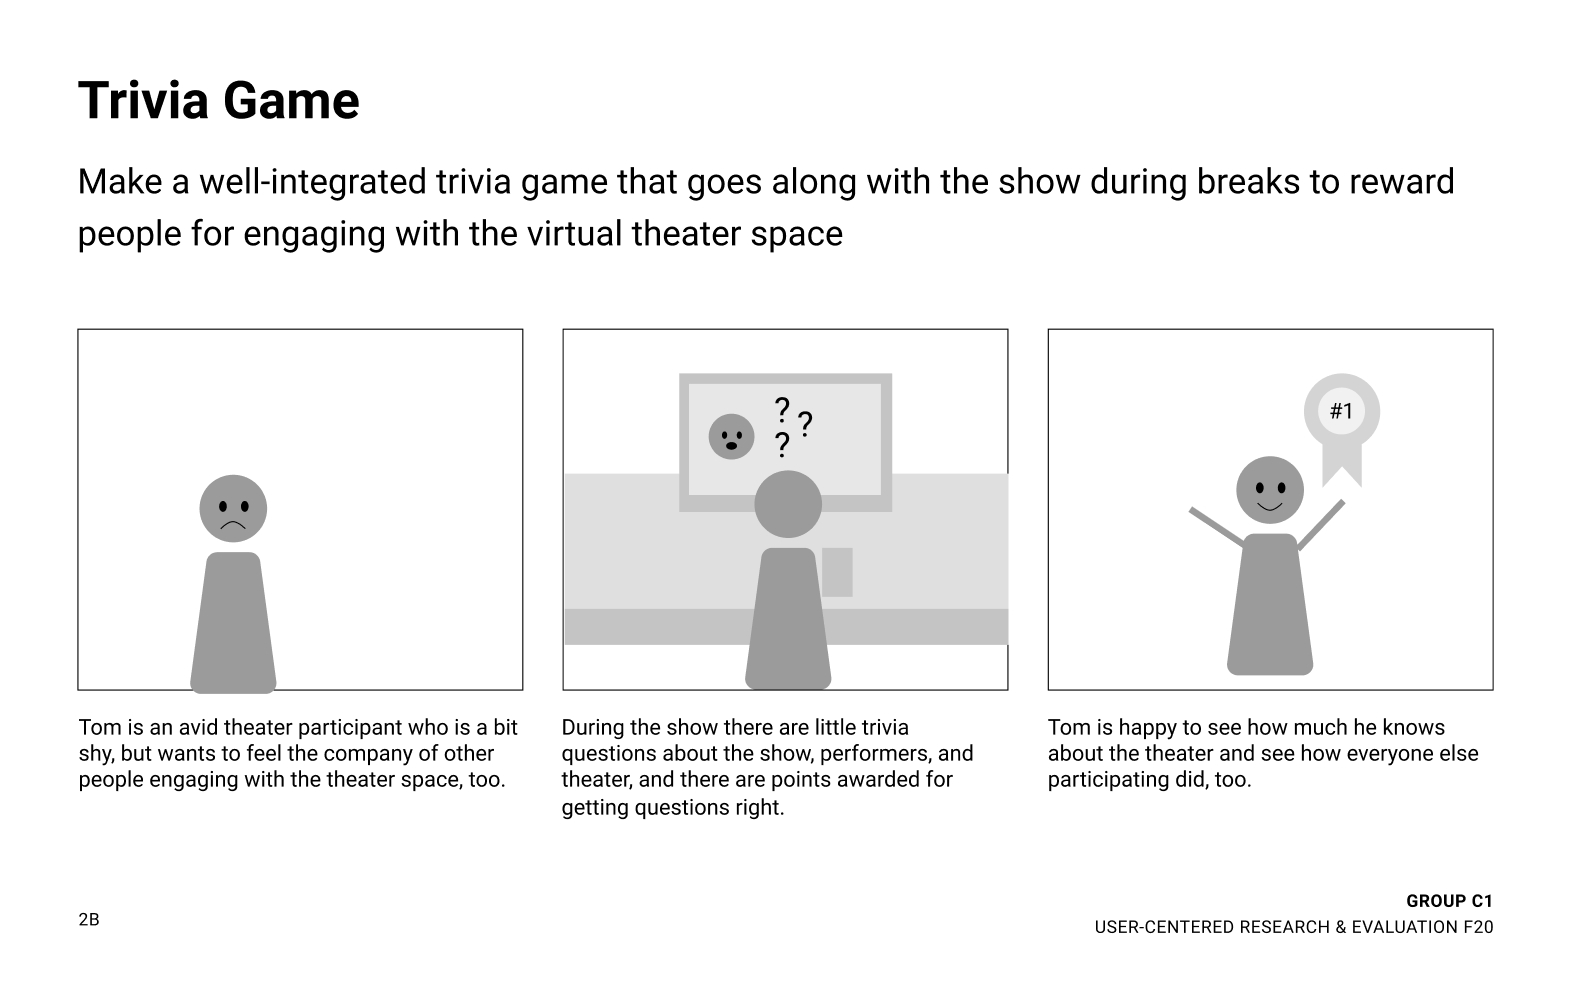 Trivia Game | Make a well-integrated trivia game that goes along with the show during breaks to reward people for engaging with the virtual theater space